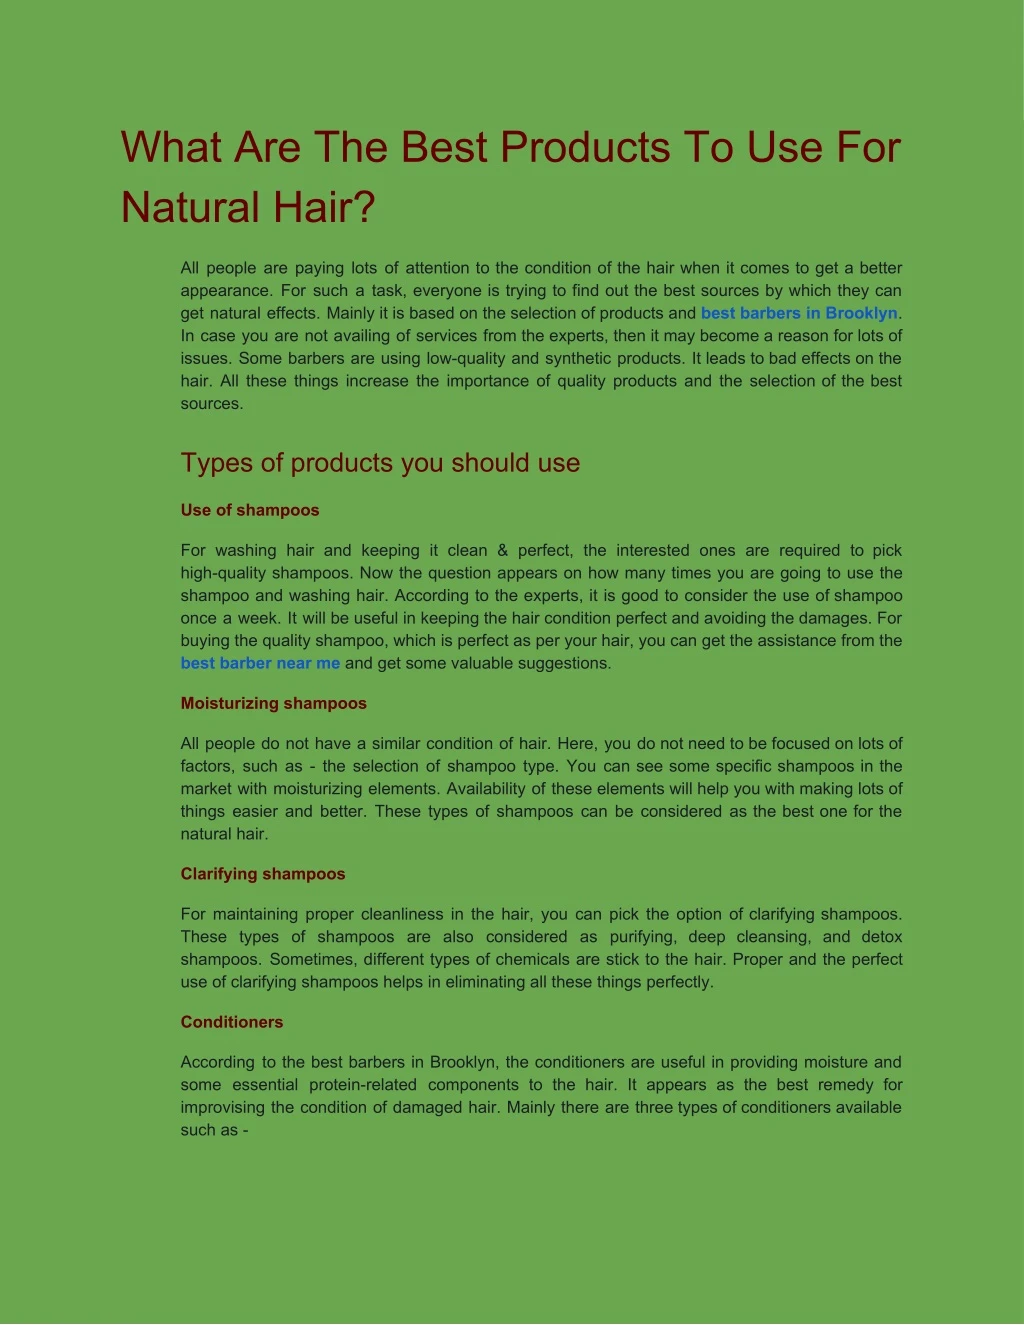 what are the best products to use for natural hair